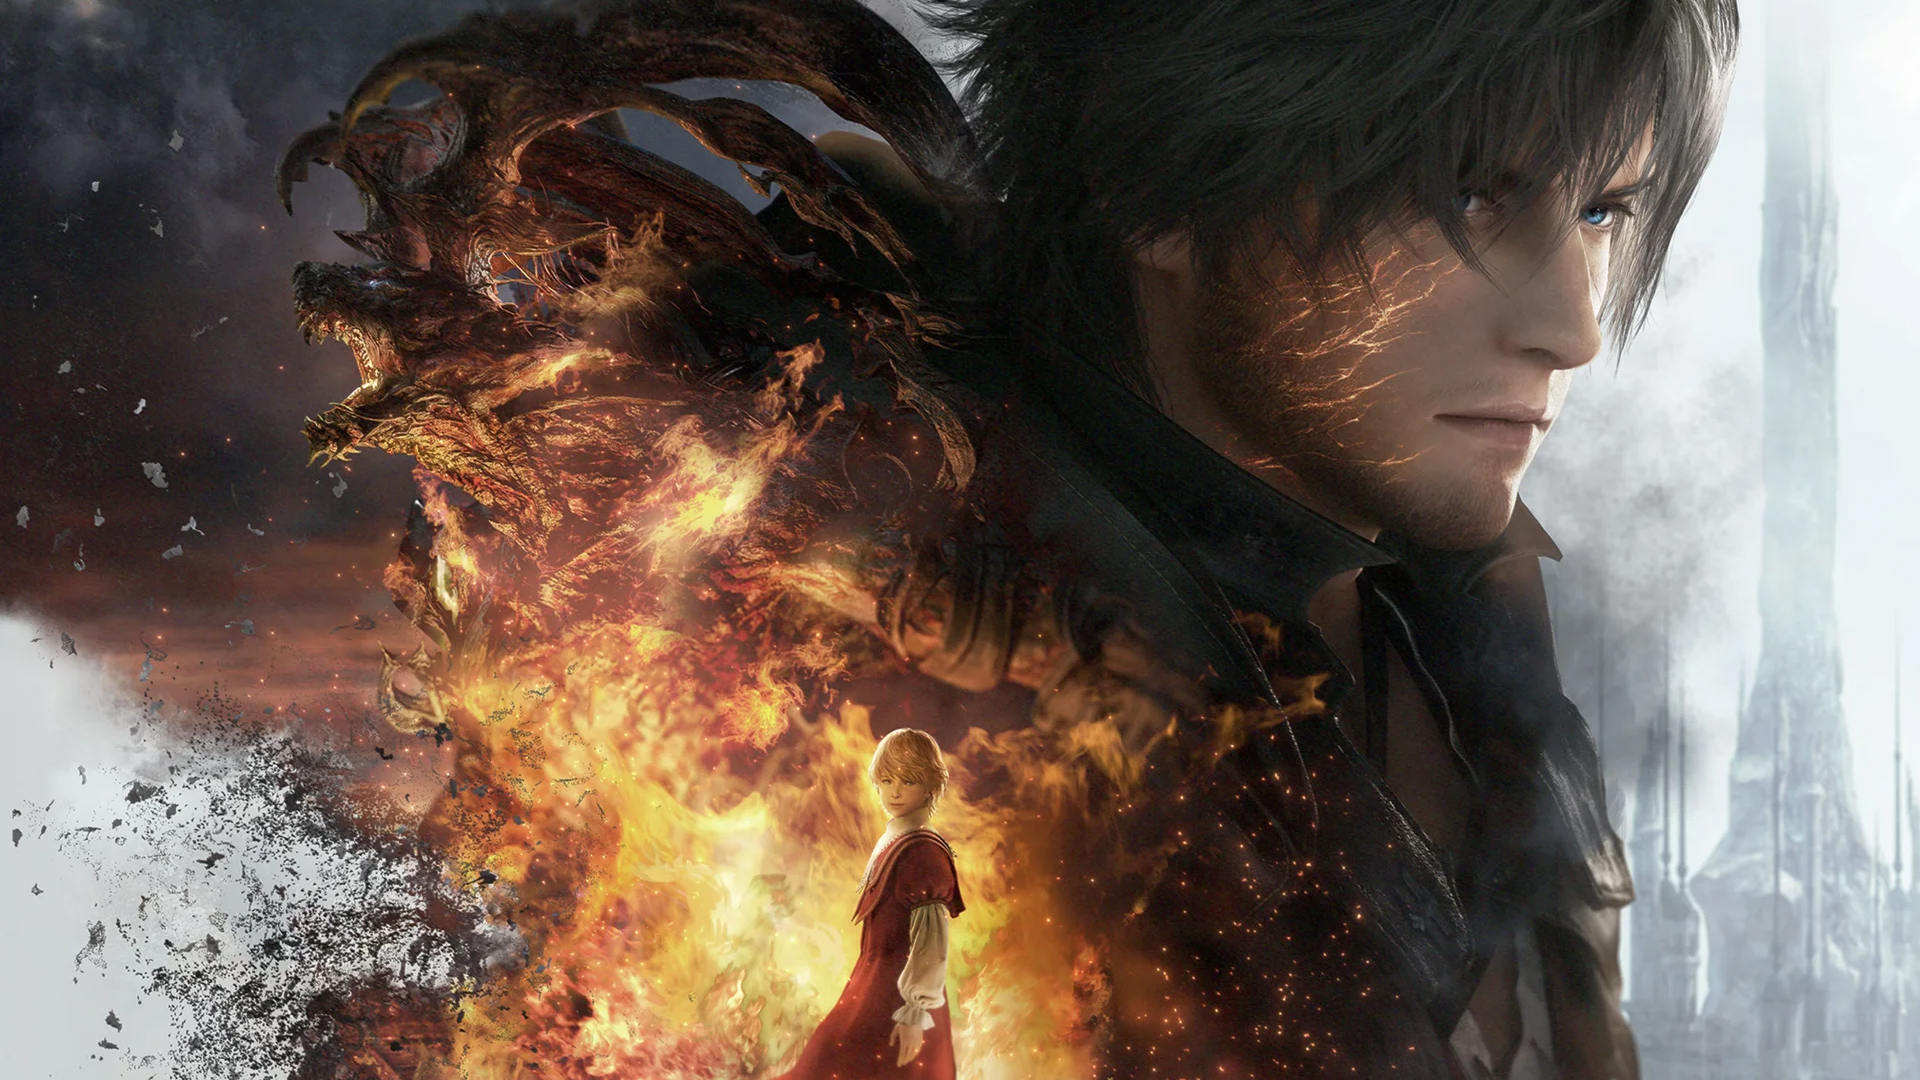 Final Fantasy 16 on PC shows signs of life, with producer Yoshi-P saying it will run best on an SSD